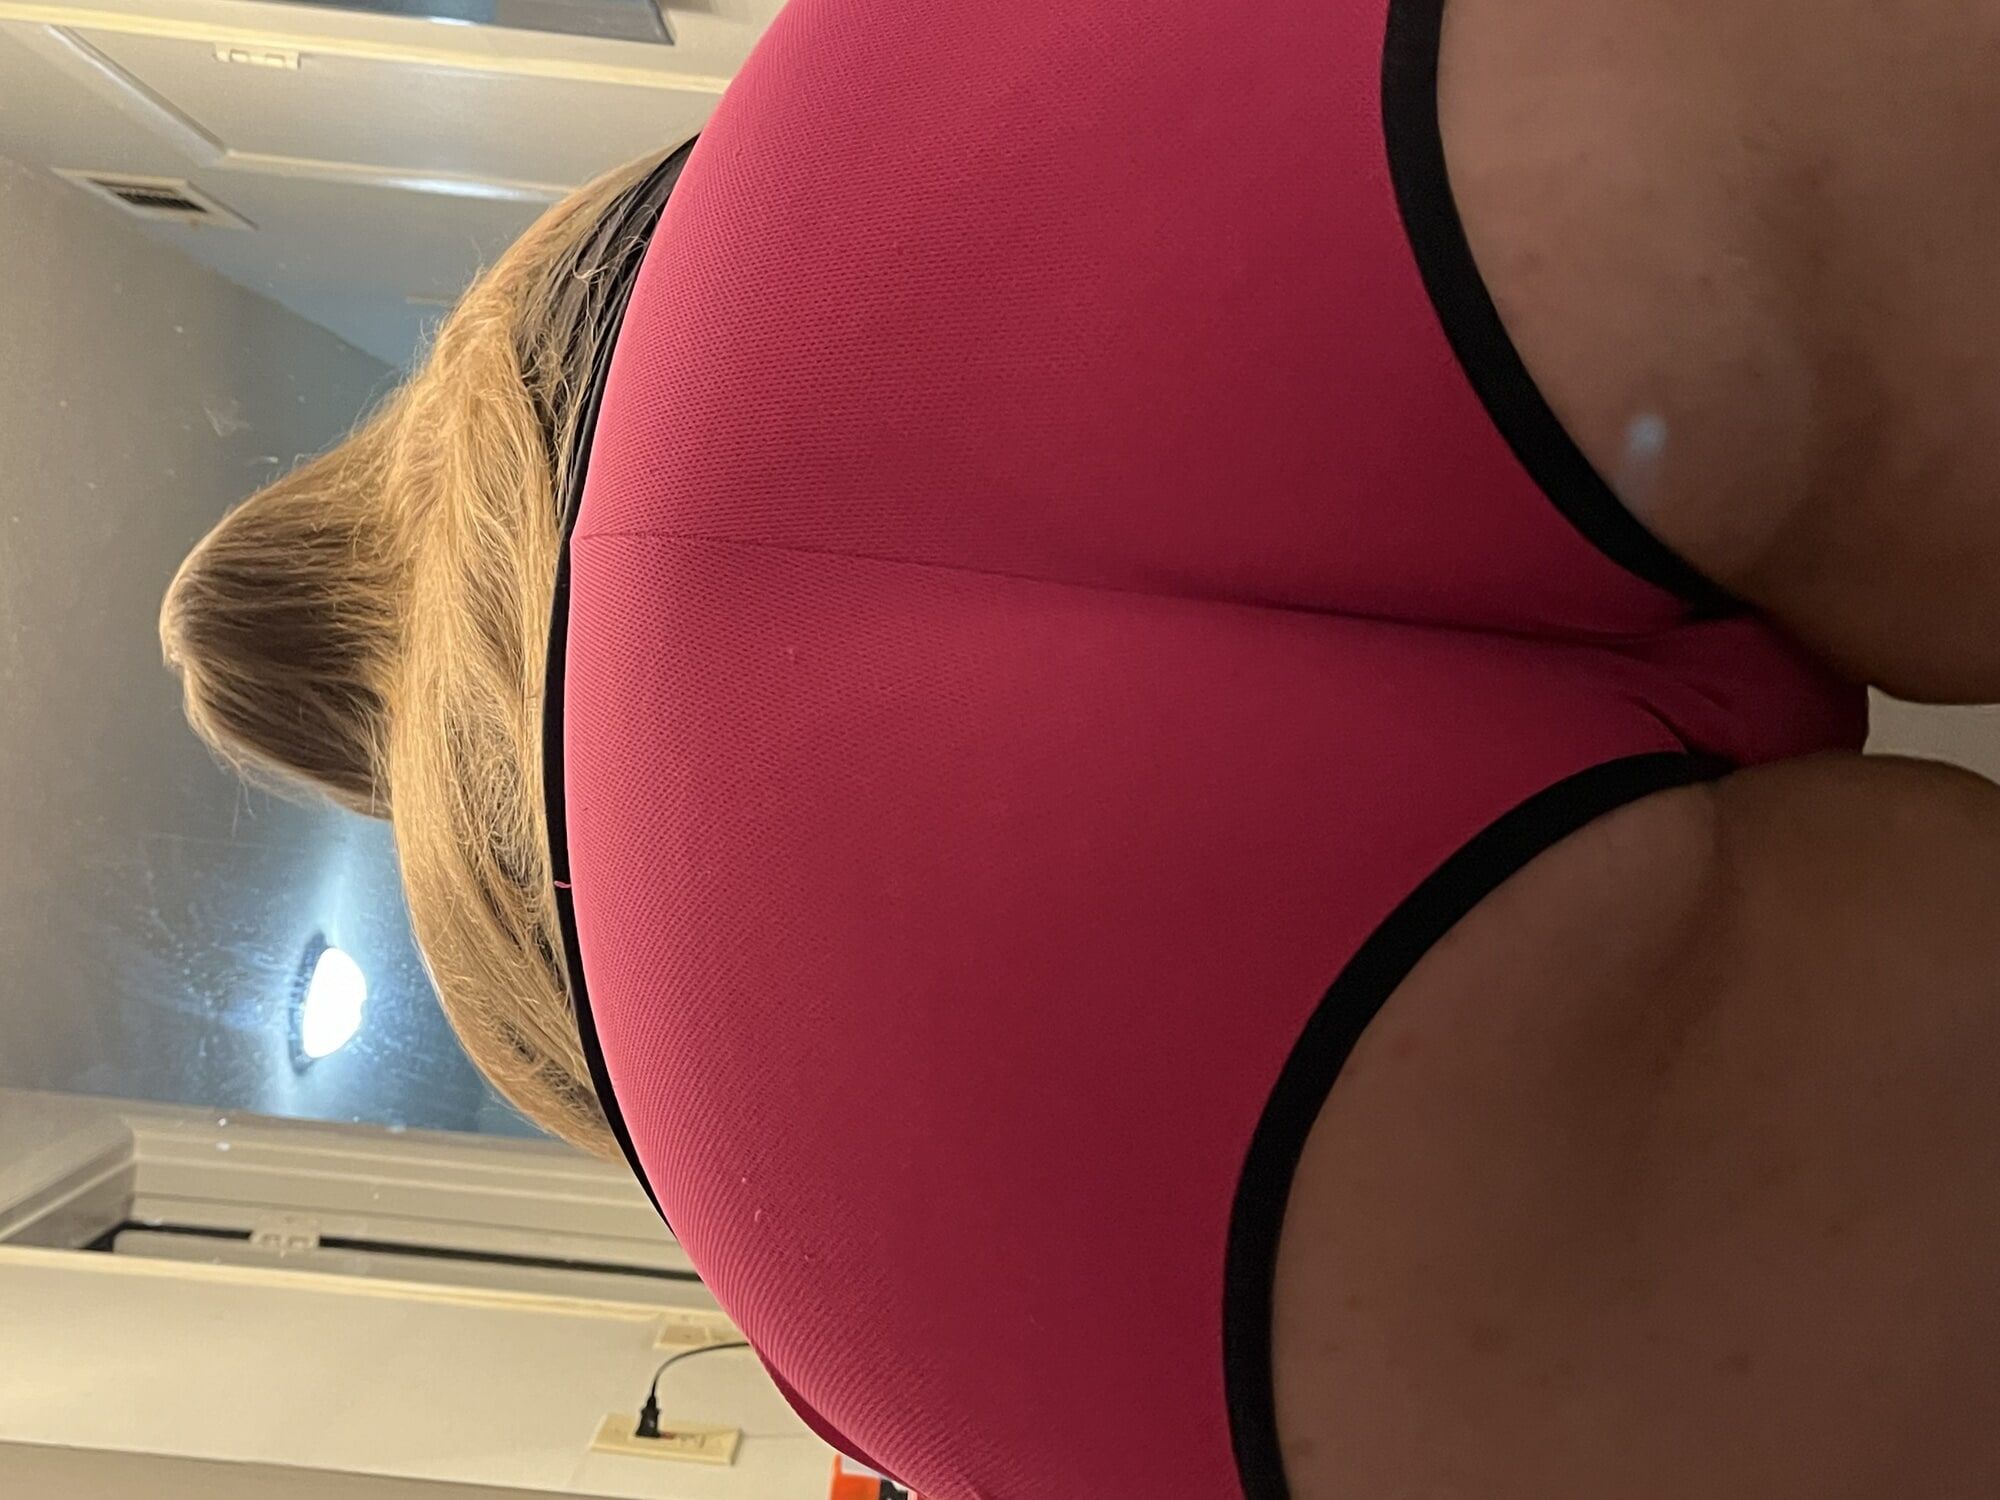 Ass, Legs, and Tits photo shoot - MJ Dawn - Onlyfans